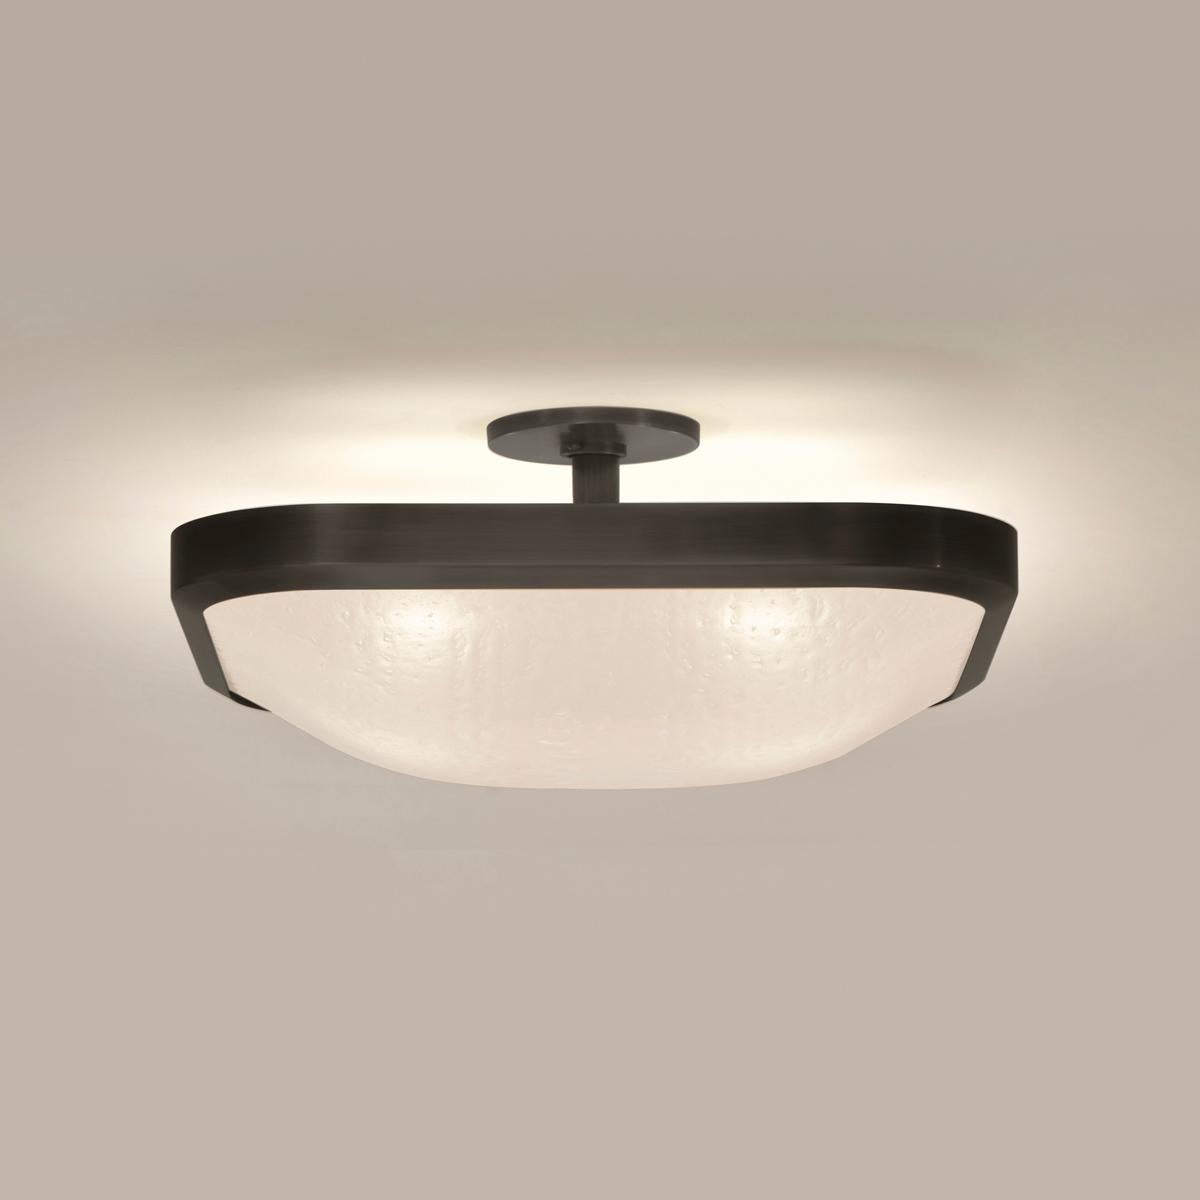 Uno Square Ceiling Light by Gaspare Asaro-Satin Brass Finish For Sale 2